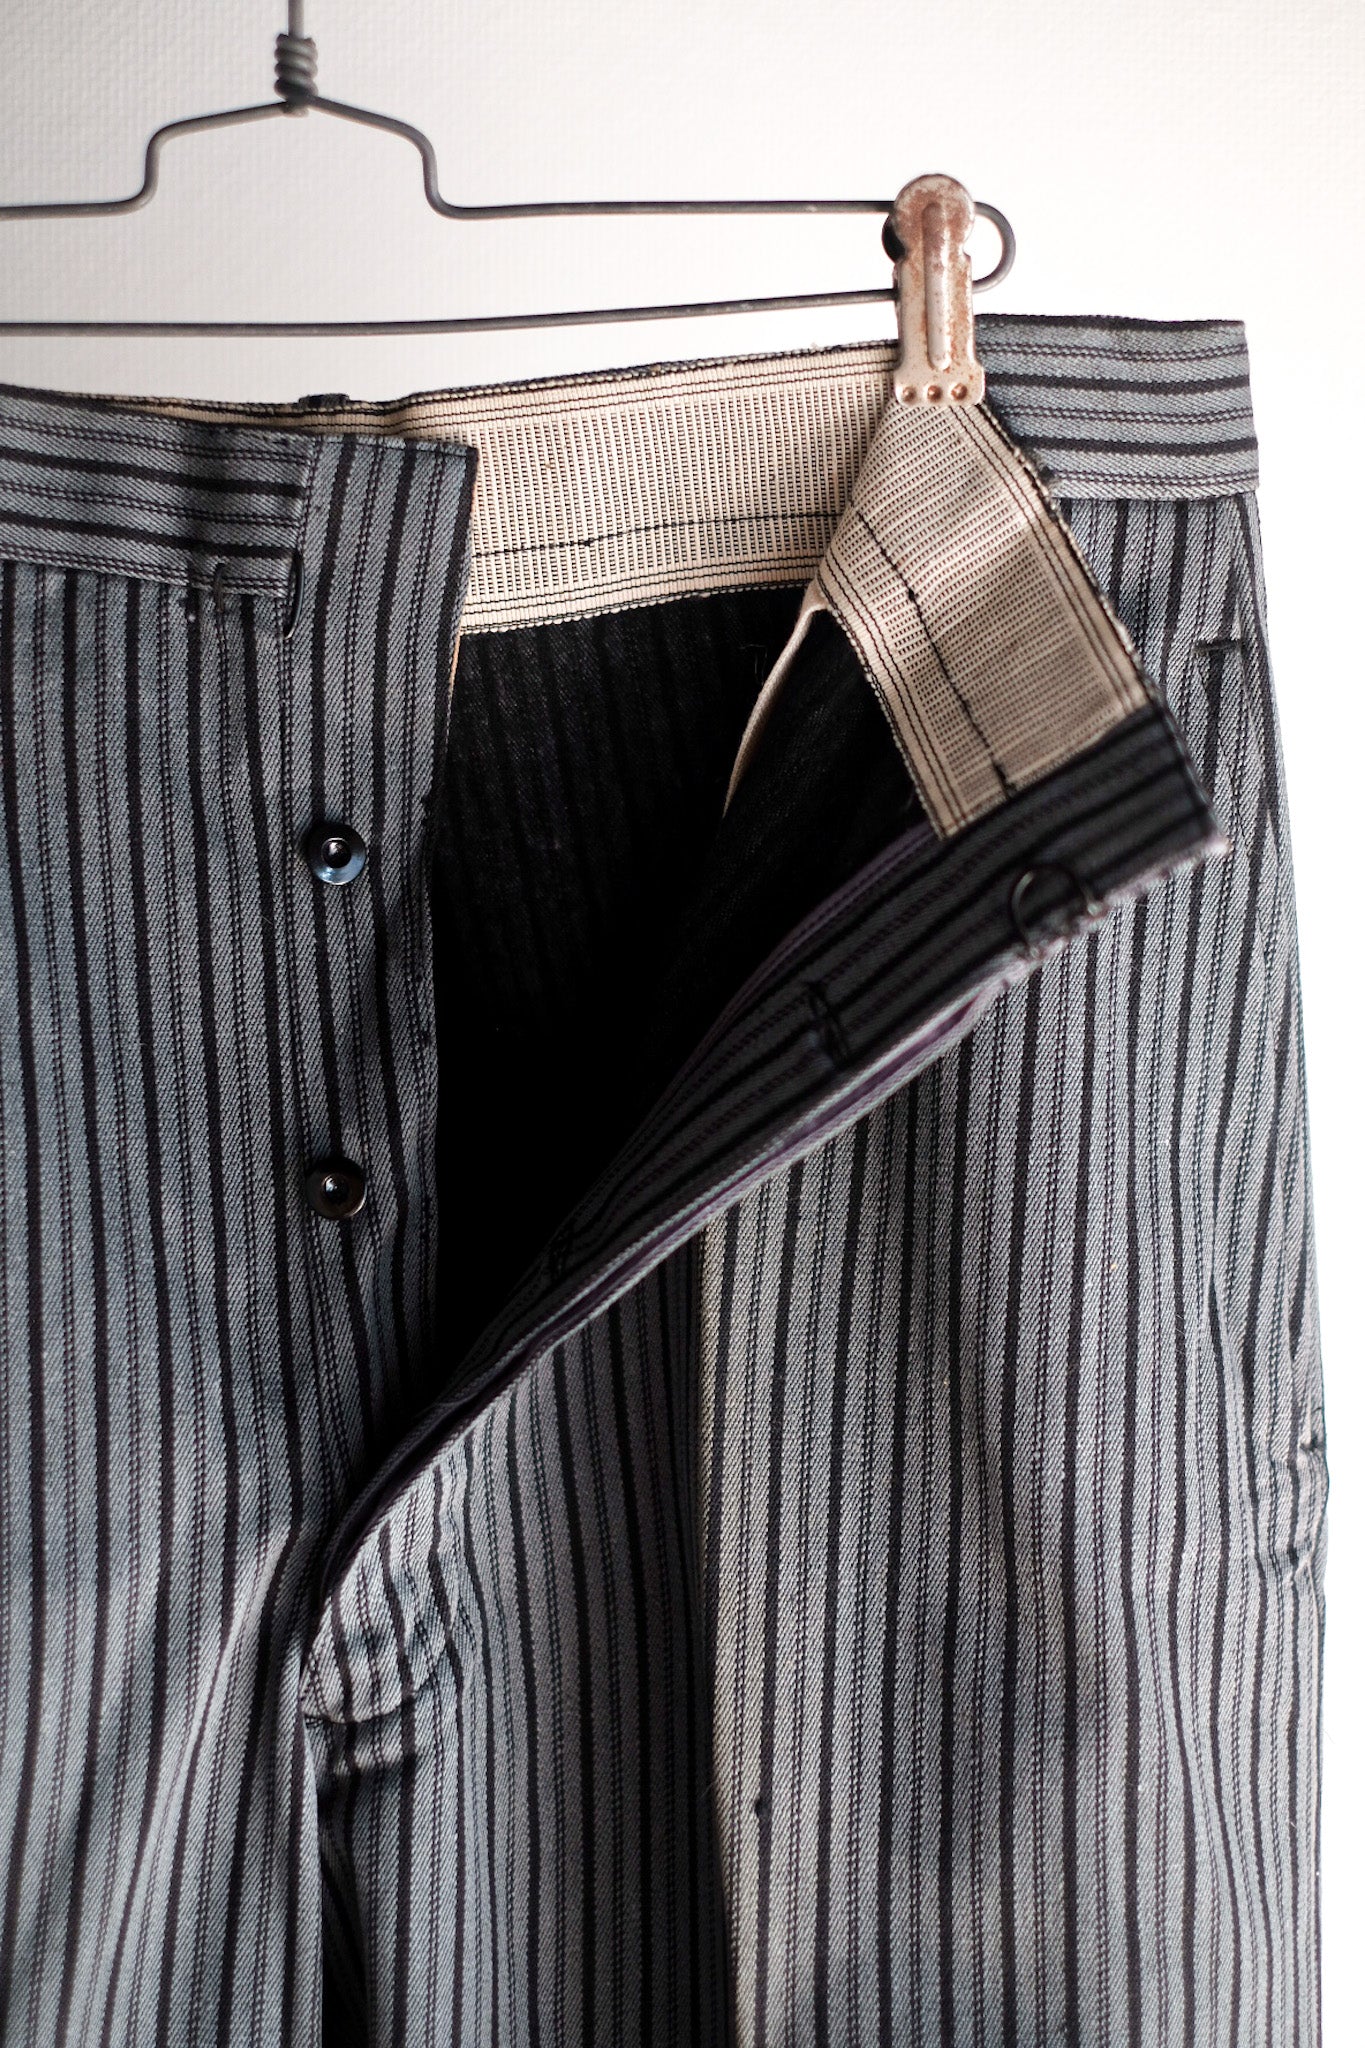 40's] French Vintage Cotton Striped Work Pants 